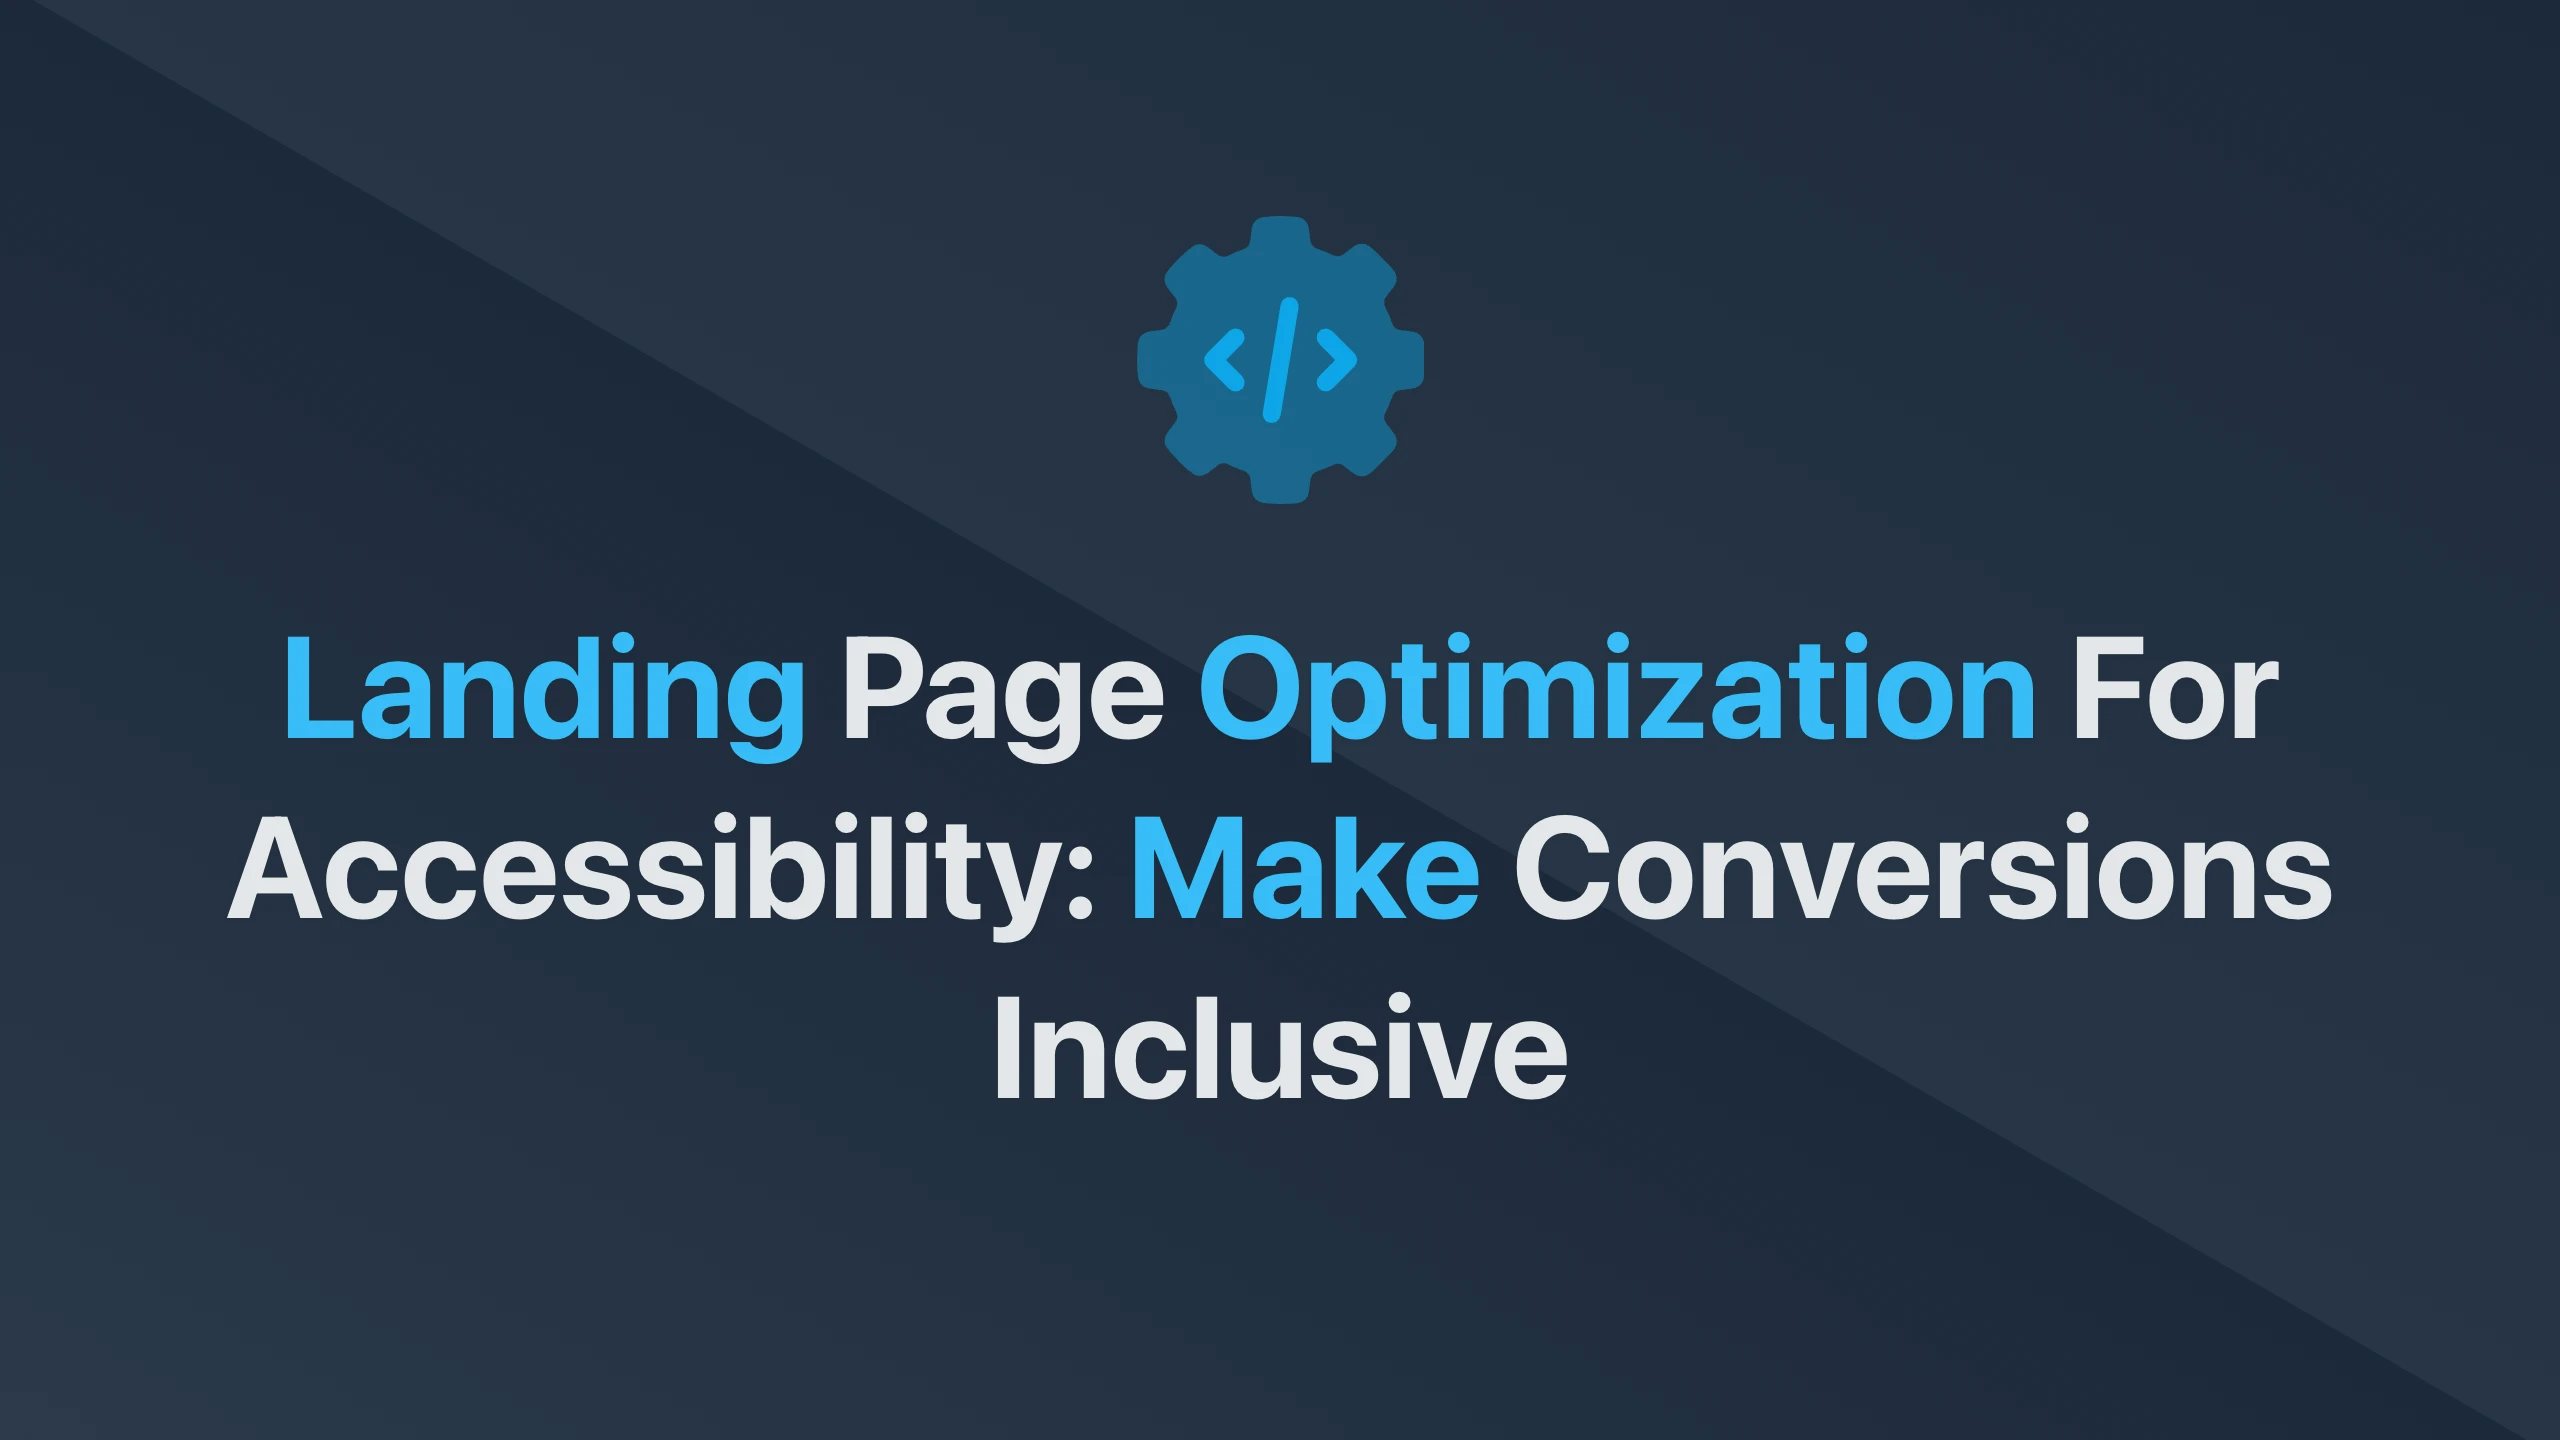 Cover Image for Landing Page Optimization for Accessibility: Make Conversions Inclusive